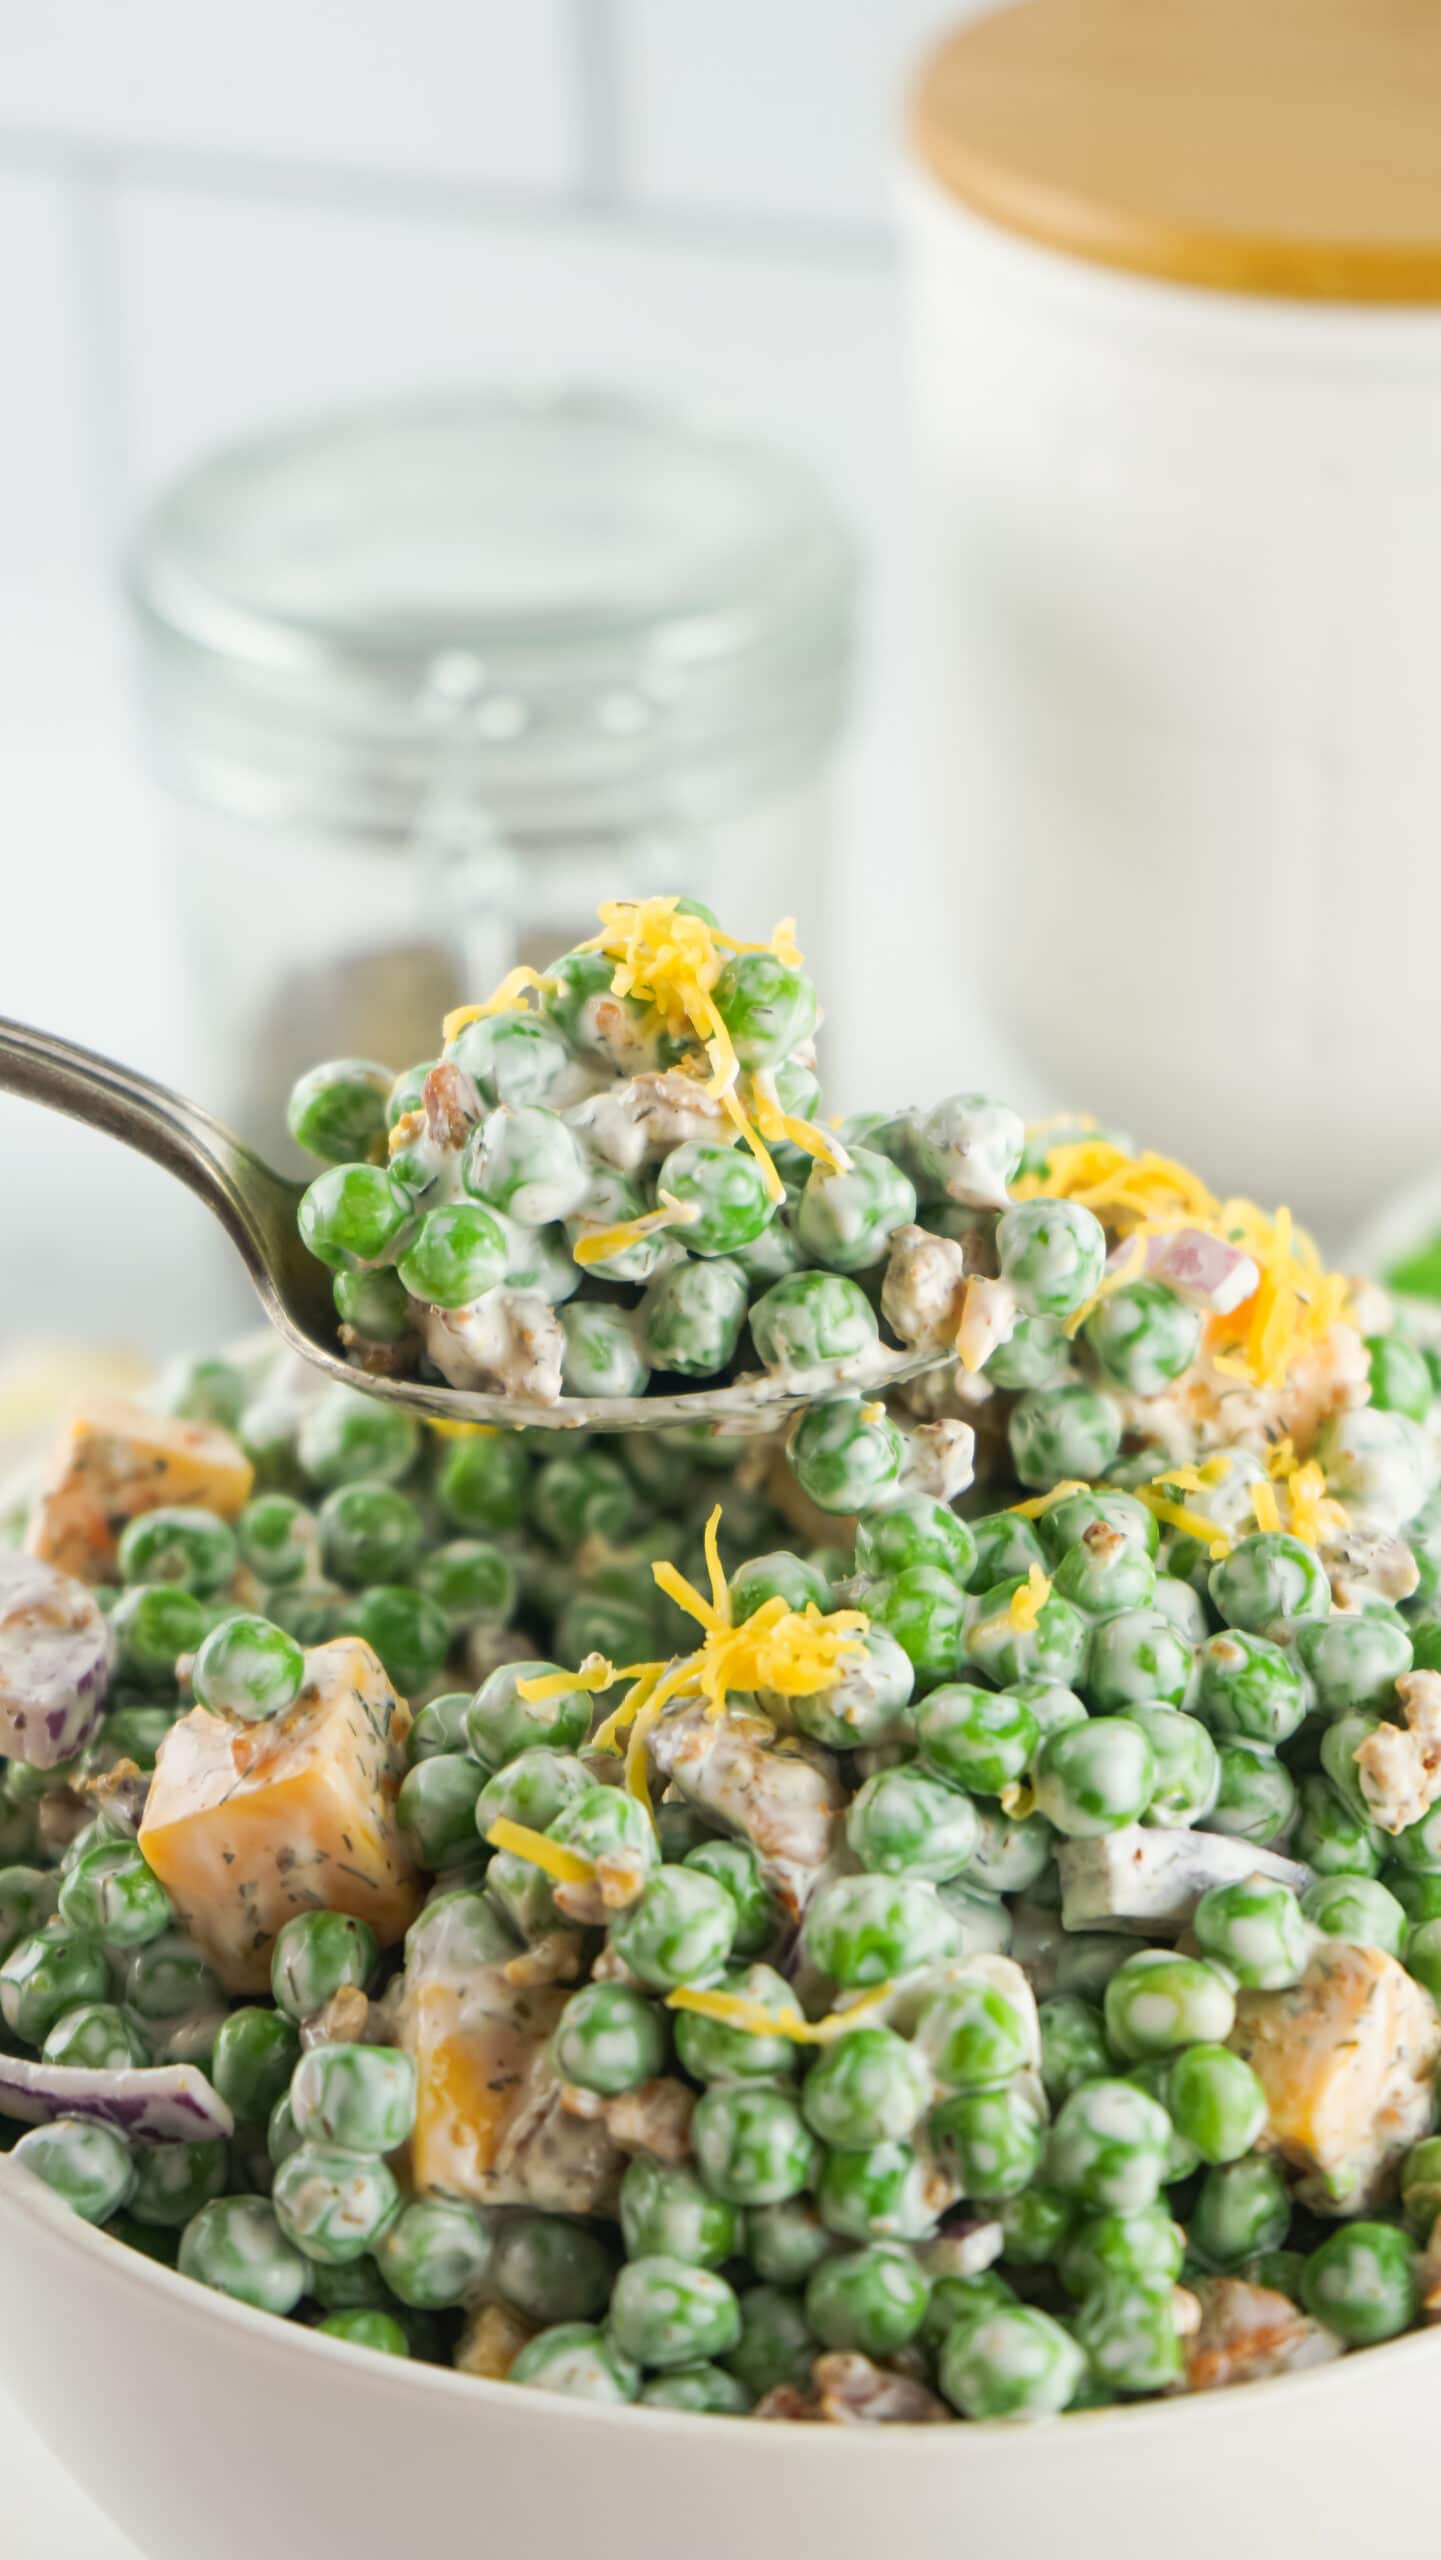 what is in pea salad